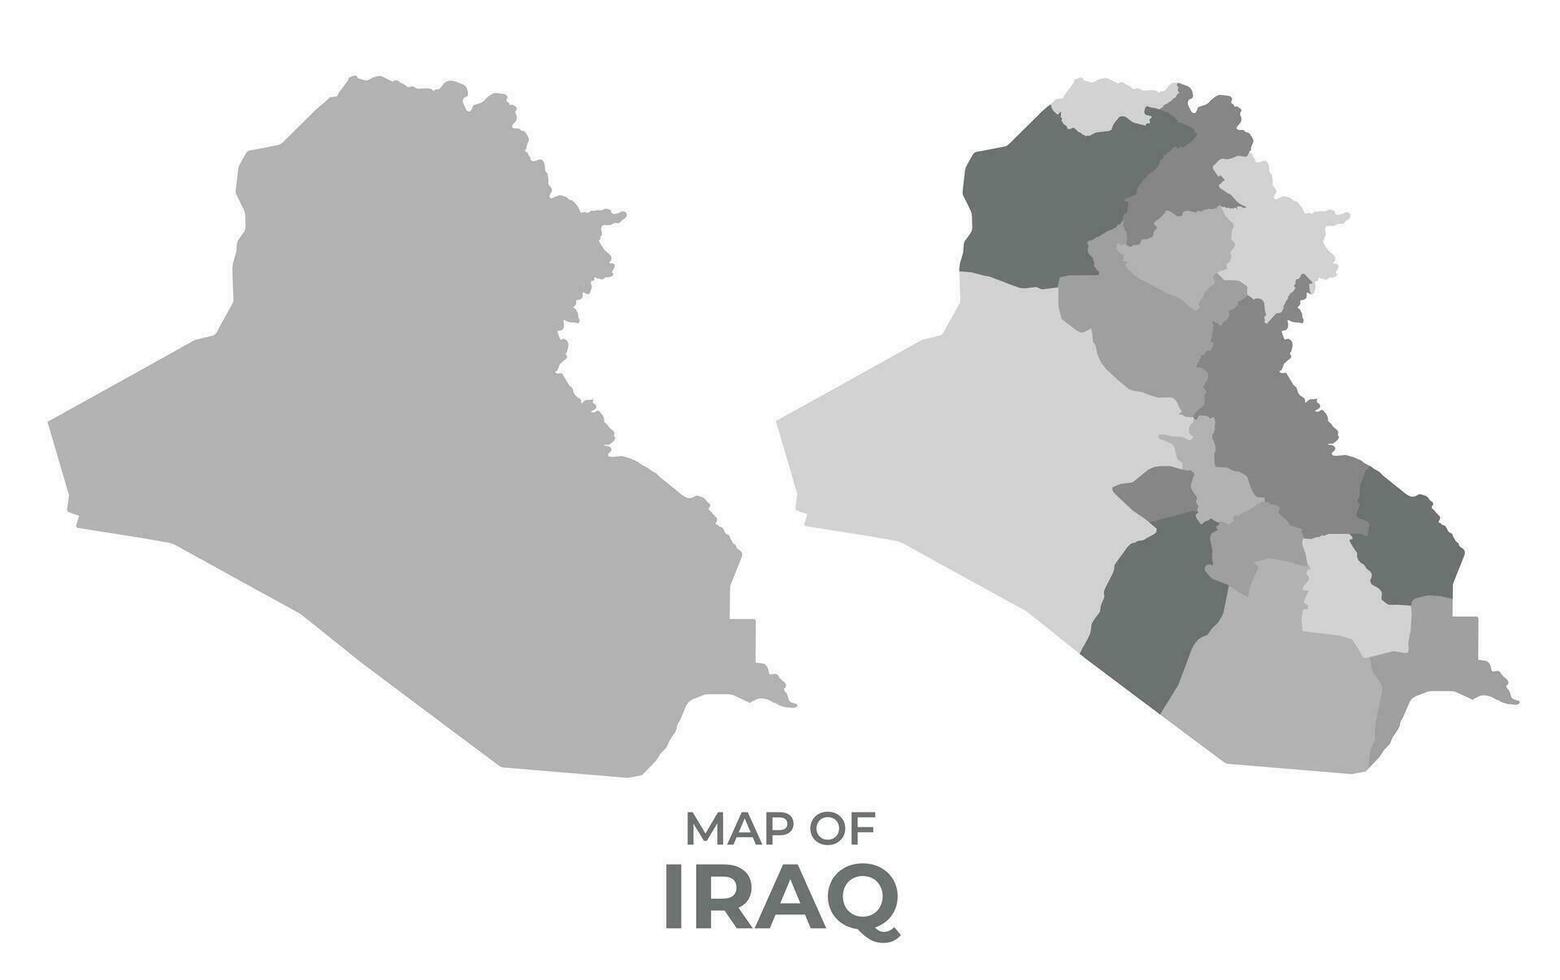 Greyscale vector map of Iraq with regions and simple flat illustration